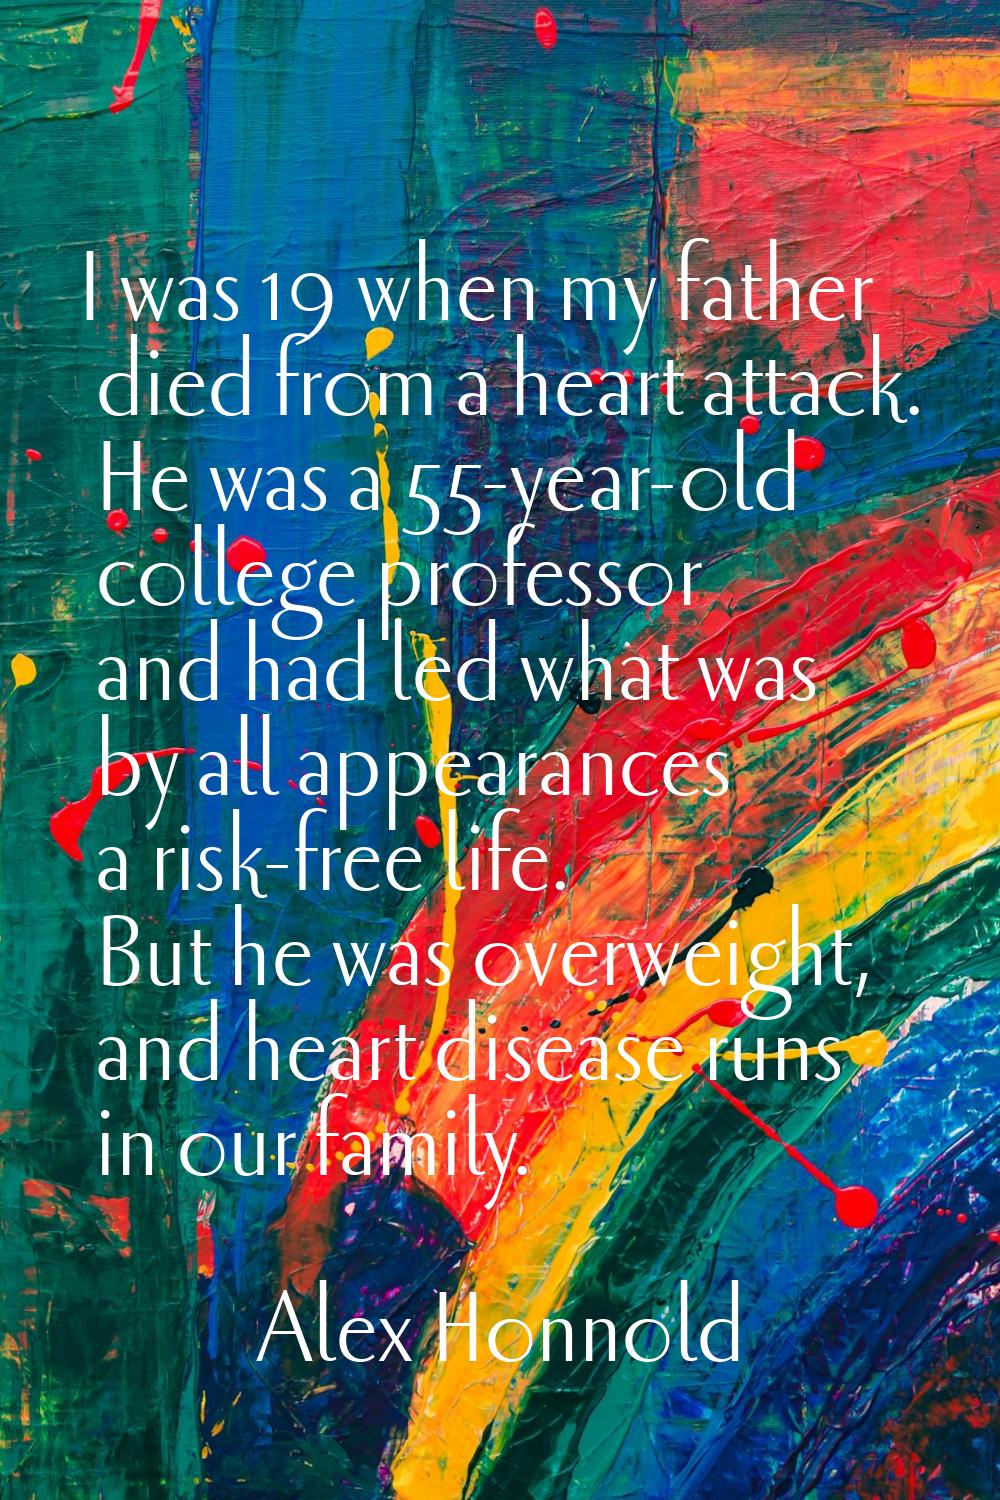 I was 19 when my father died from a heart attack. He was a 55-year-old college professor and had le